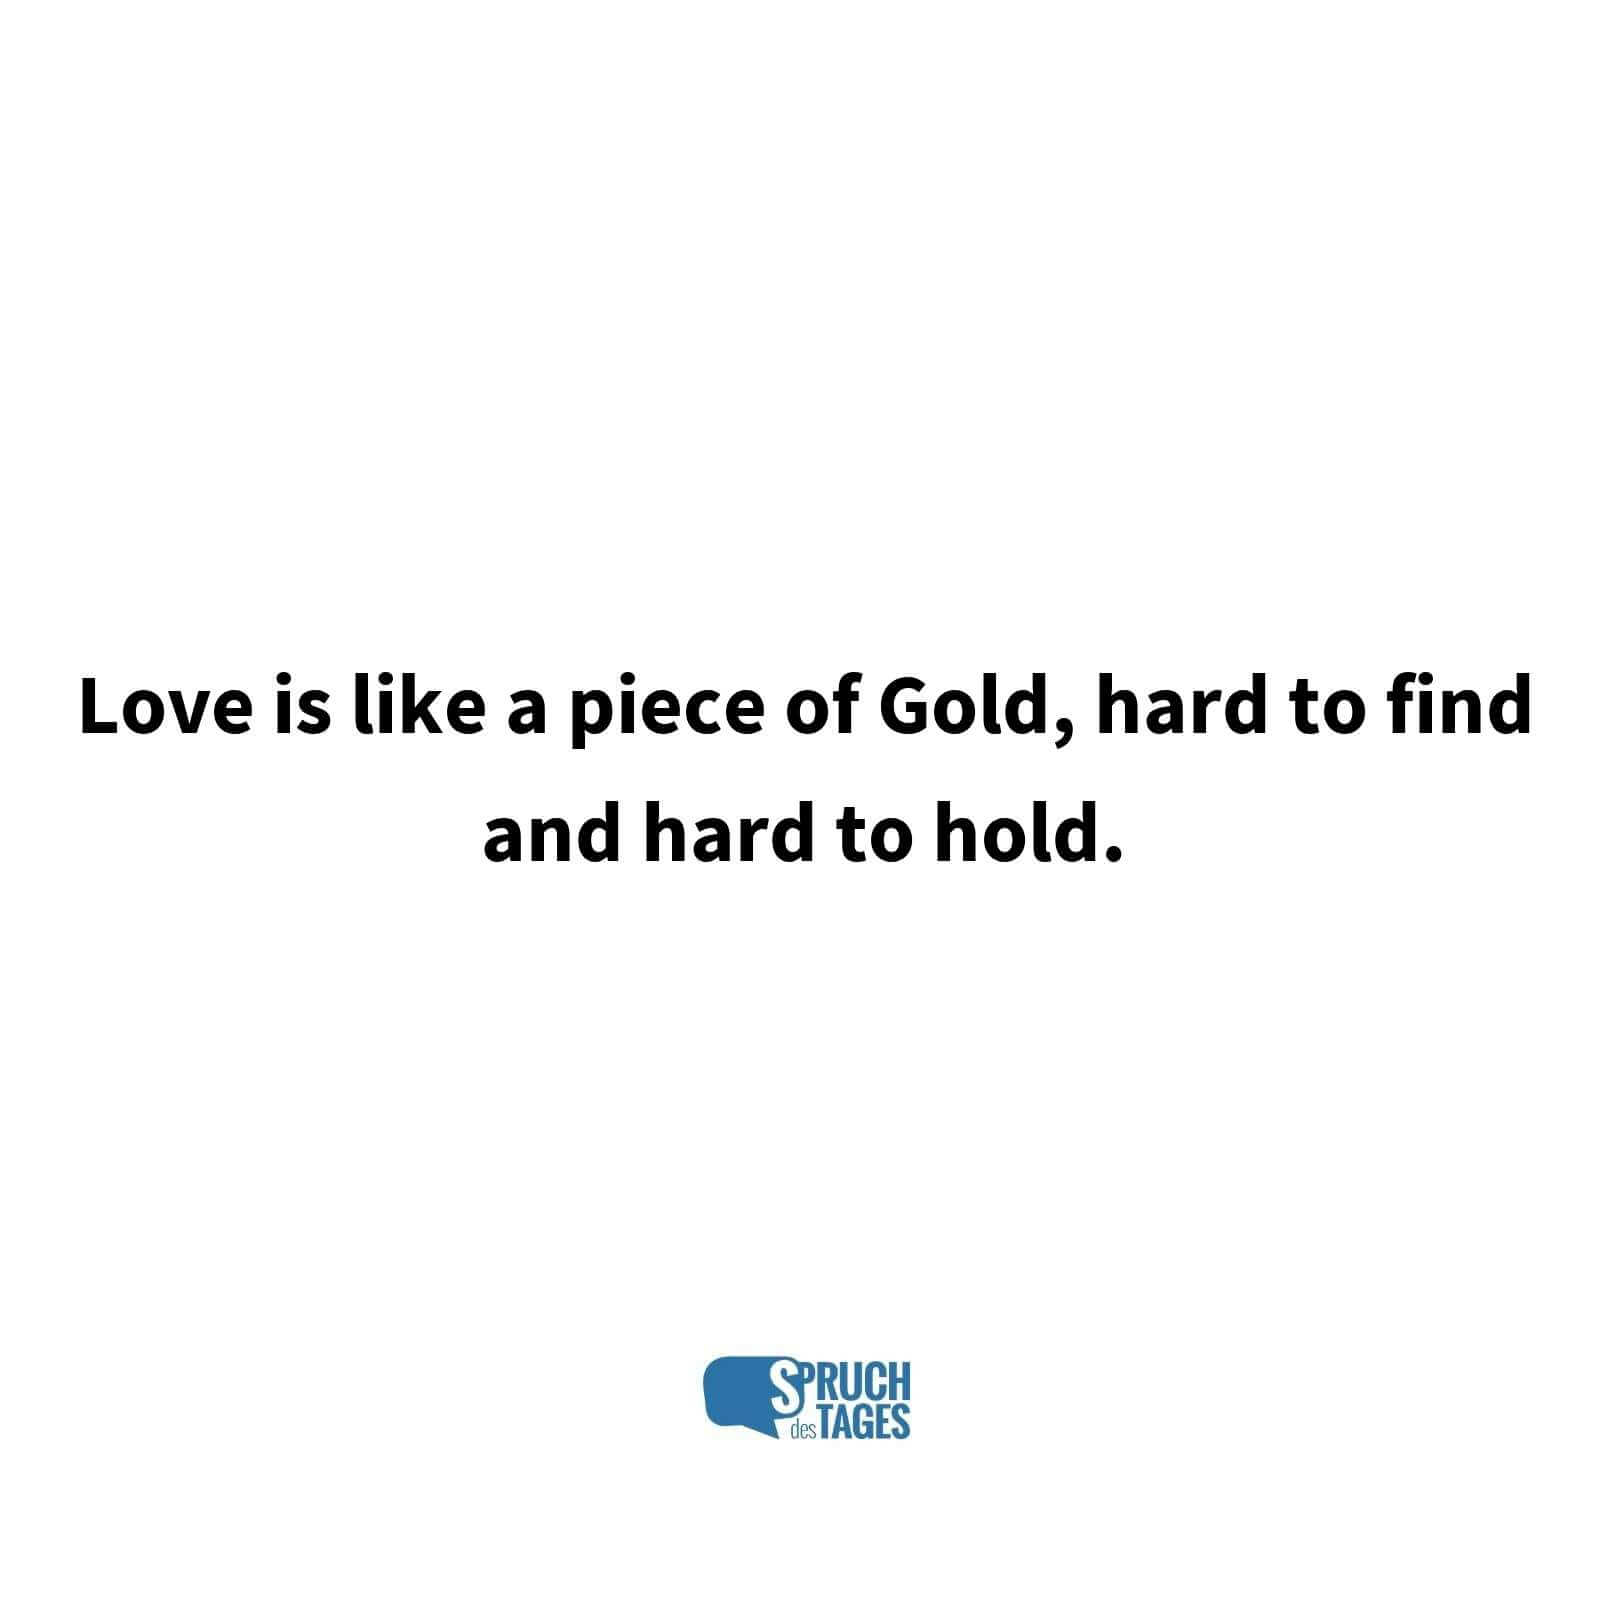 Love is like a piece of Gold, hard to find and hard to hold.